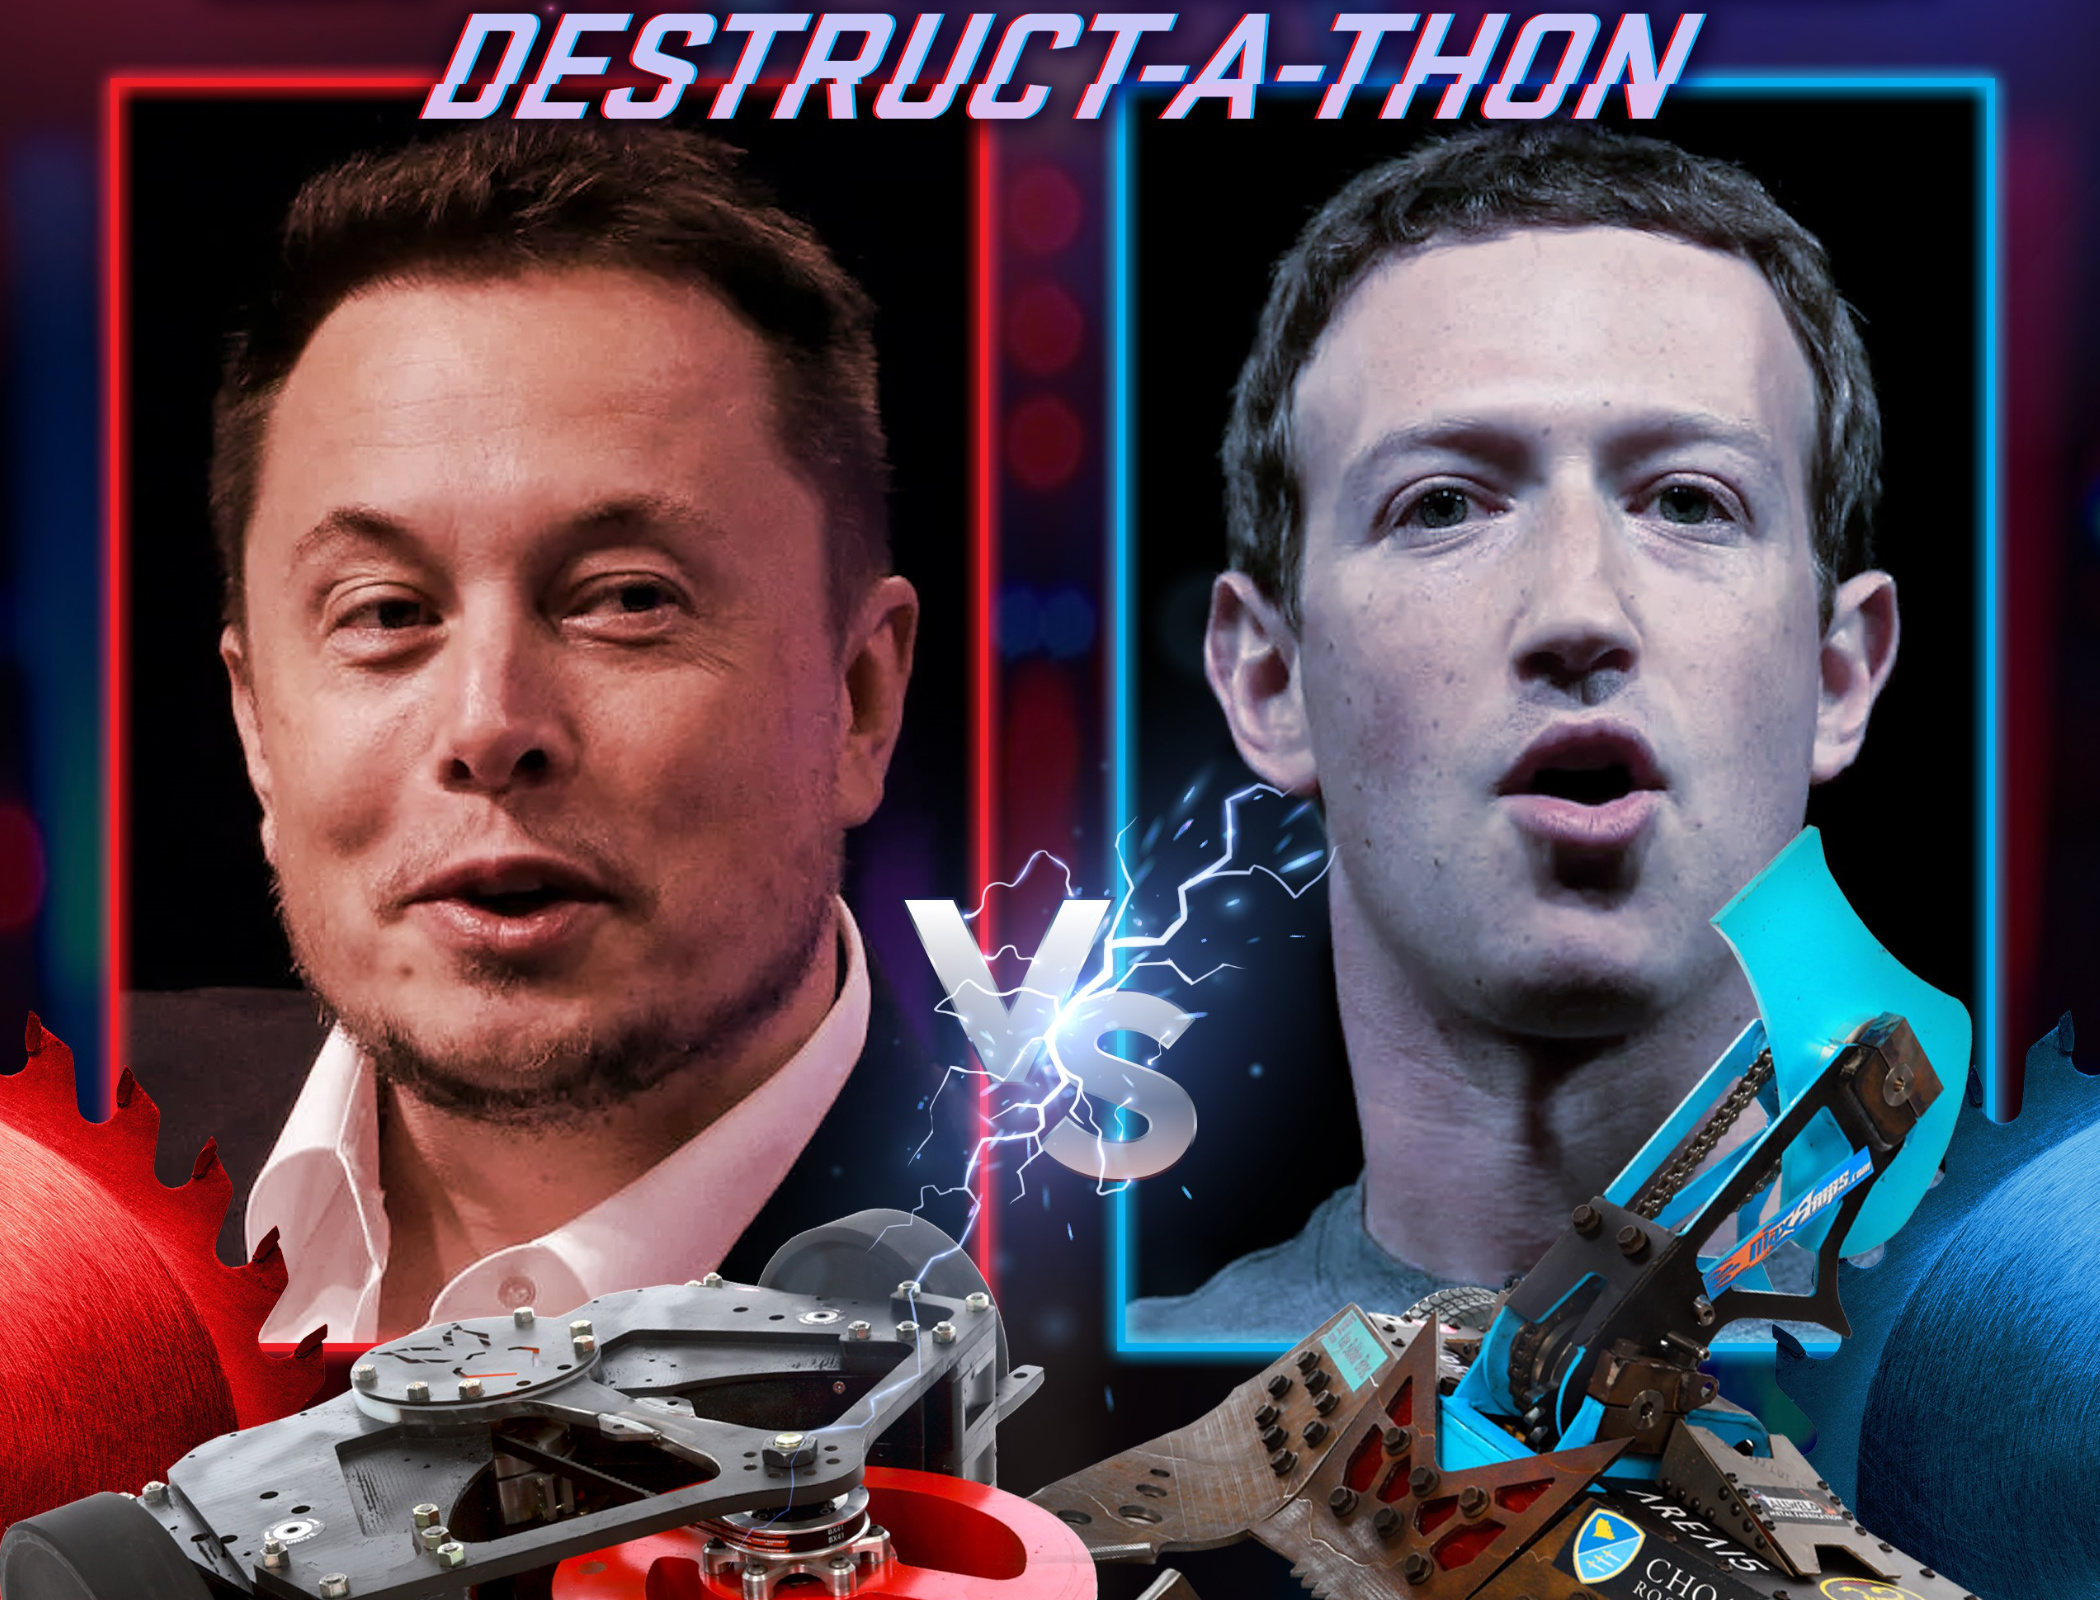 BattleBots challenges Musk and Zuckerberg to bot-on-bot fight